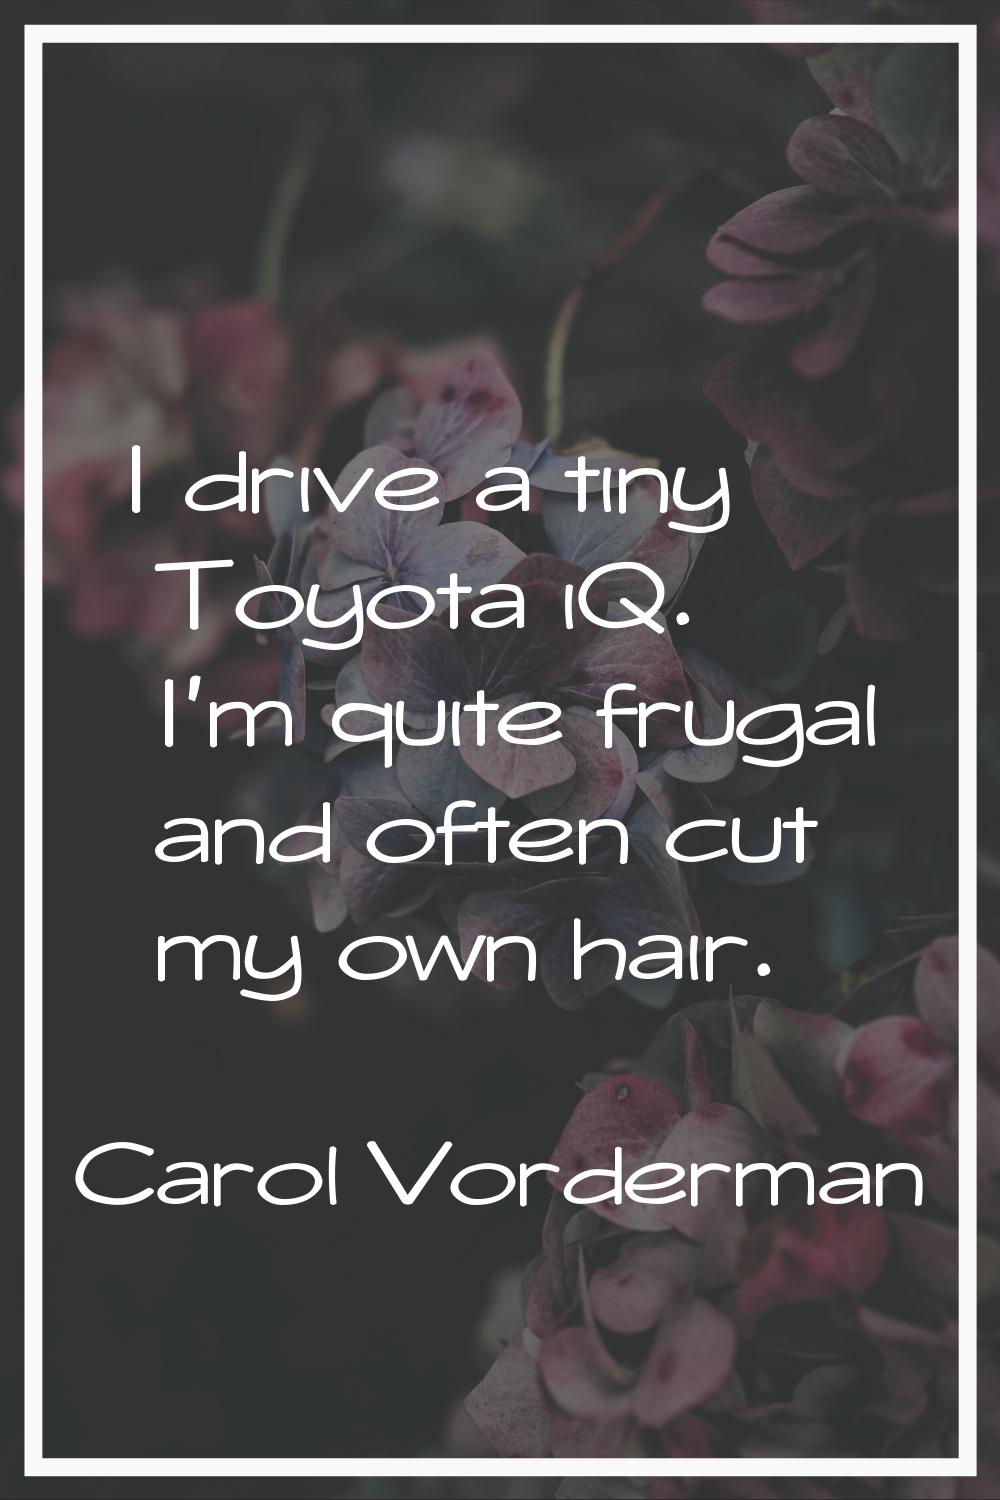 I drive a tiny Toyota iQ. I'm quite frugal and often cut my own hair.